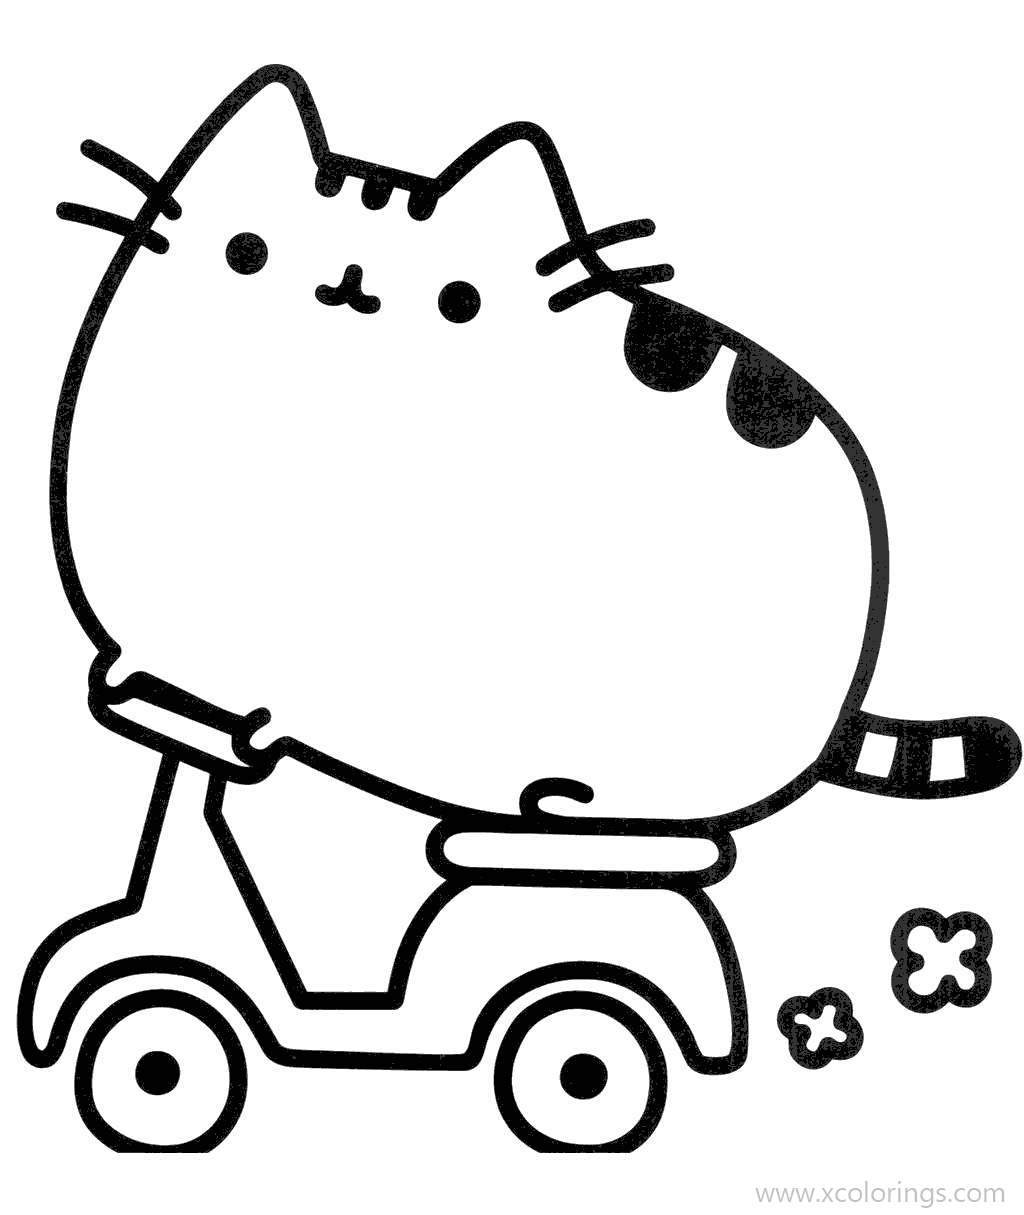 Free Pusheen Riding Scooter Coloring Pages printable